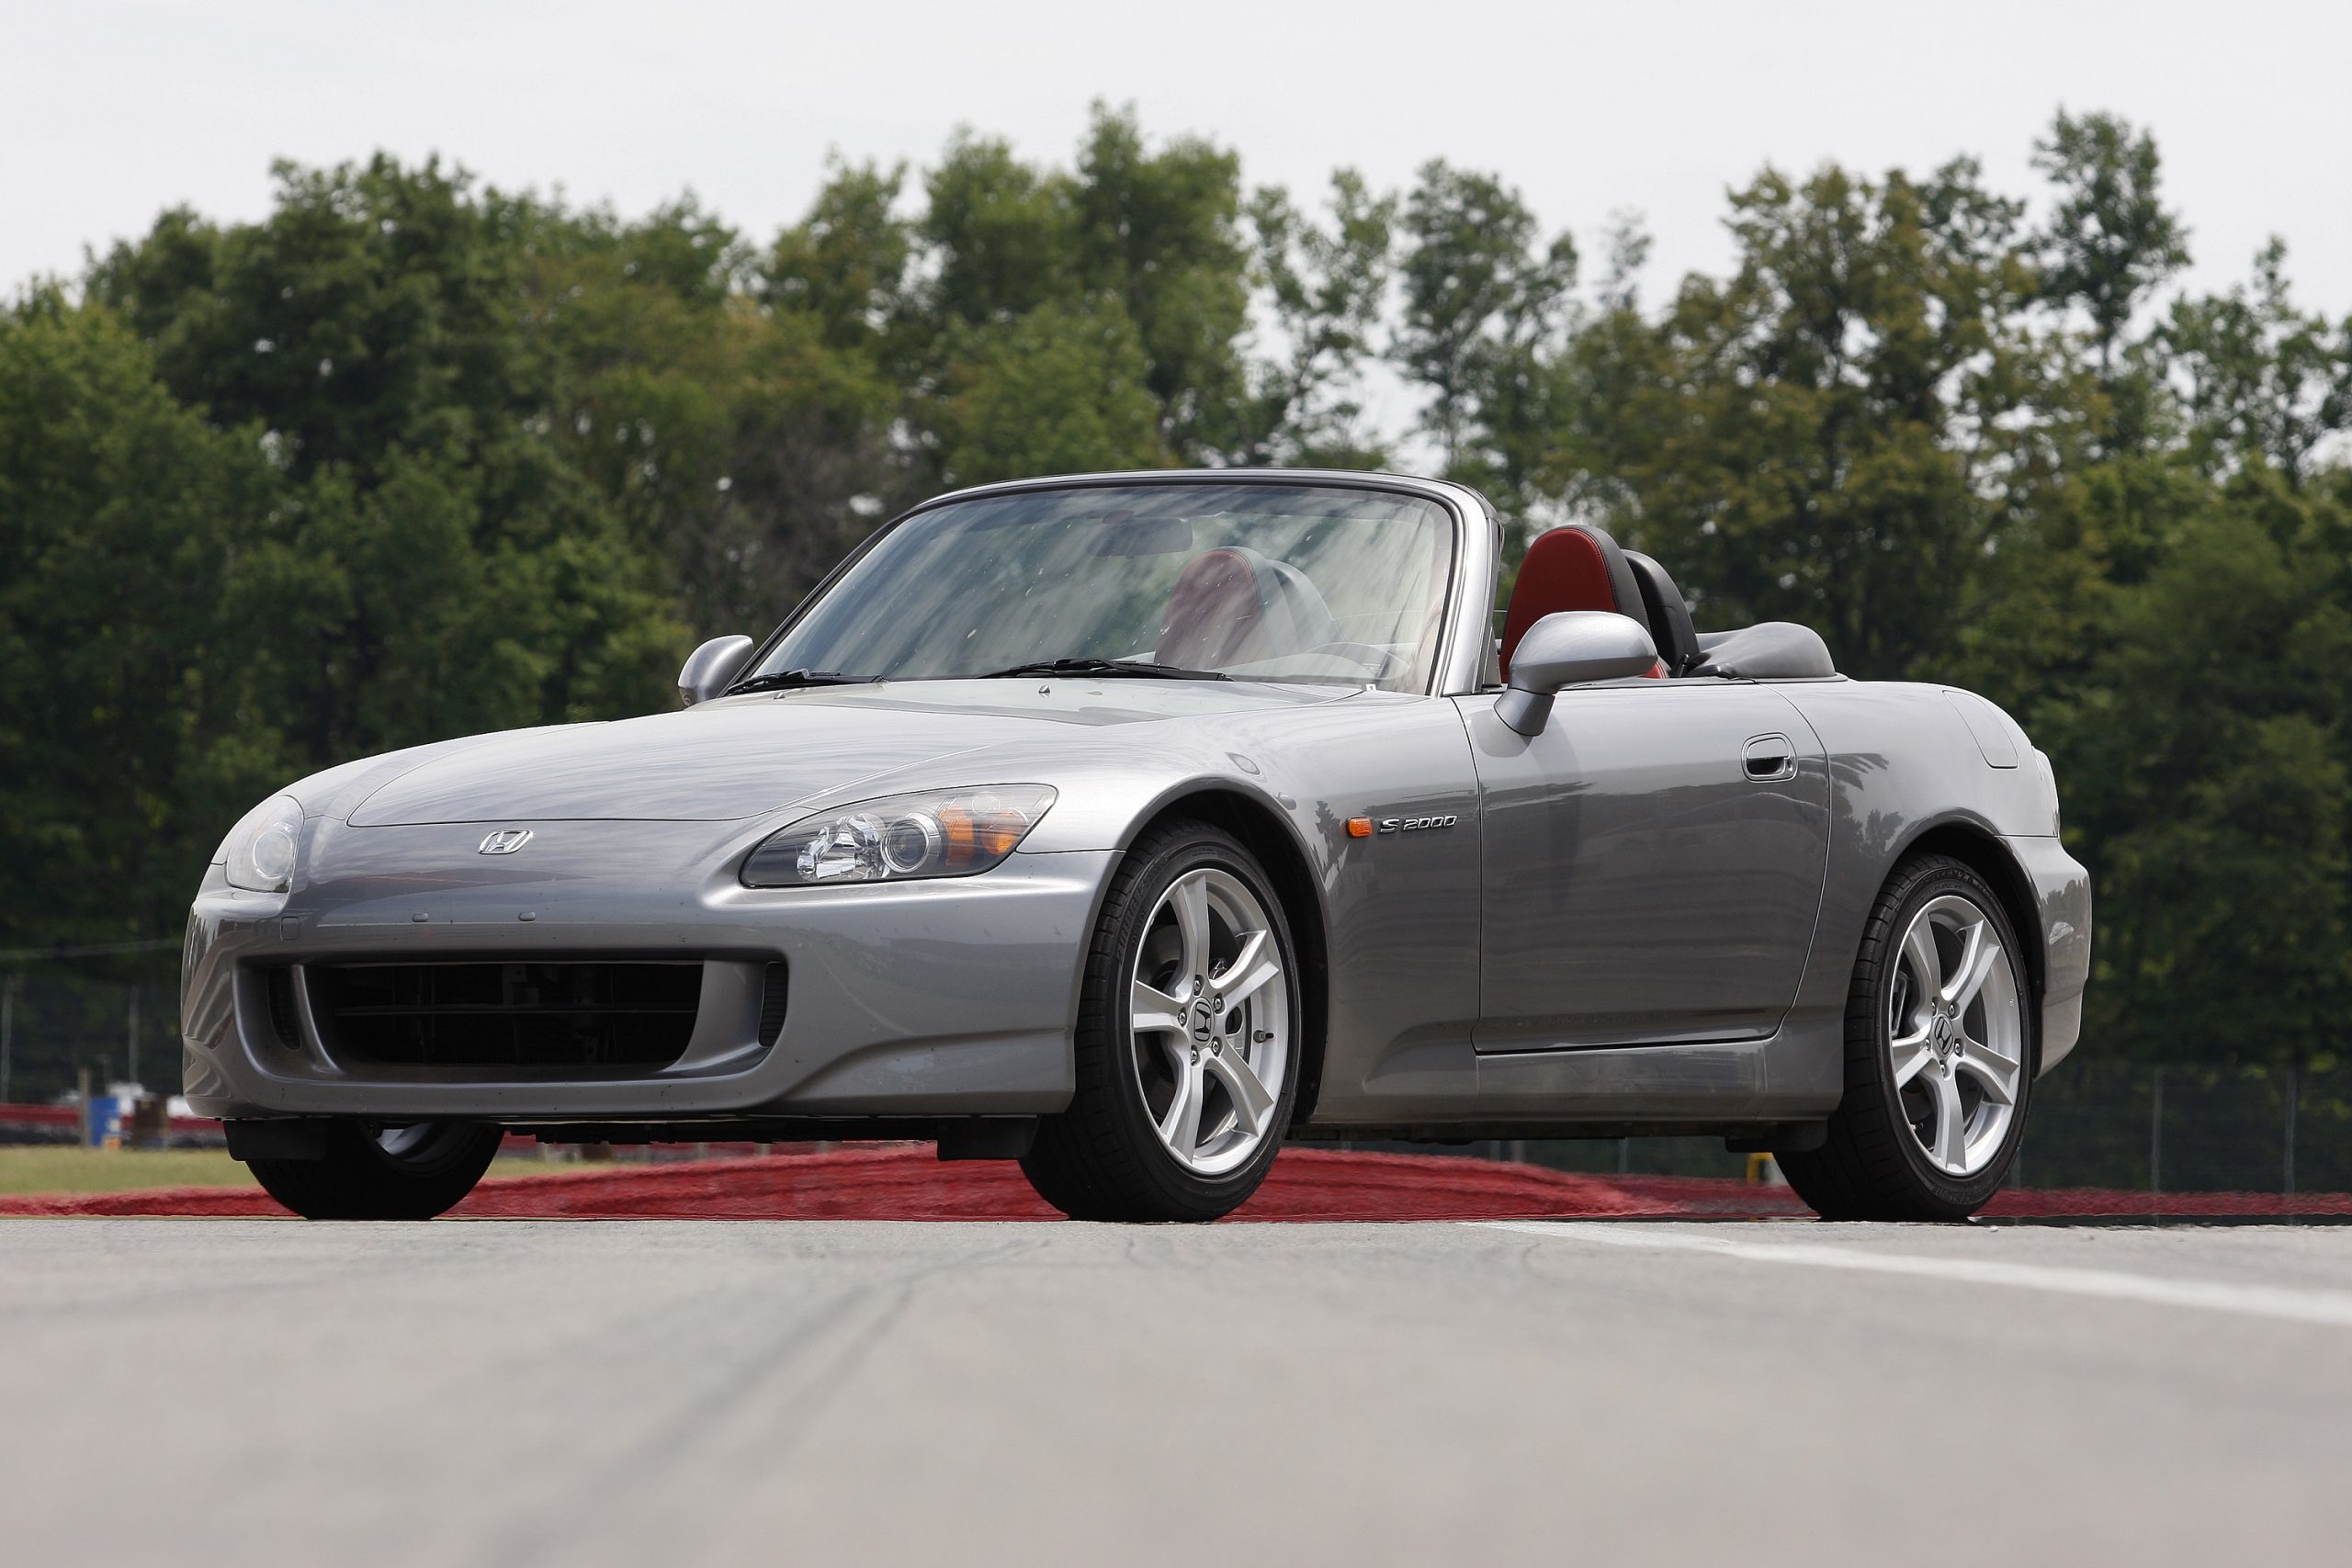 A grey AP1 generation Honda S2000 roadster shot from the front 3/4 at a race track